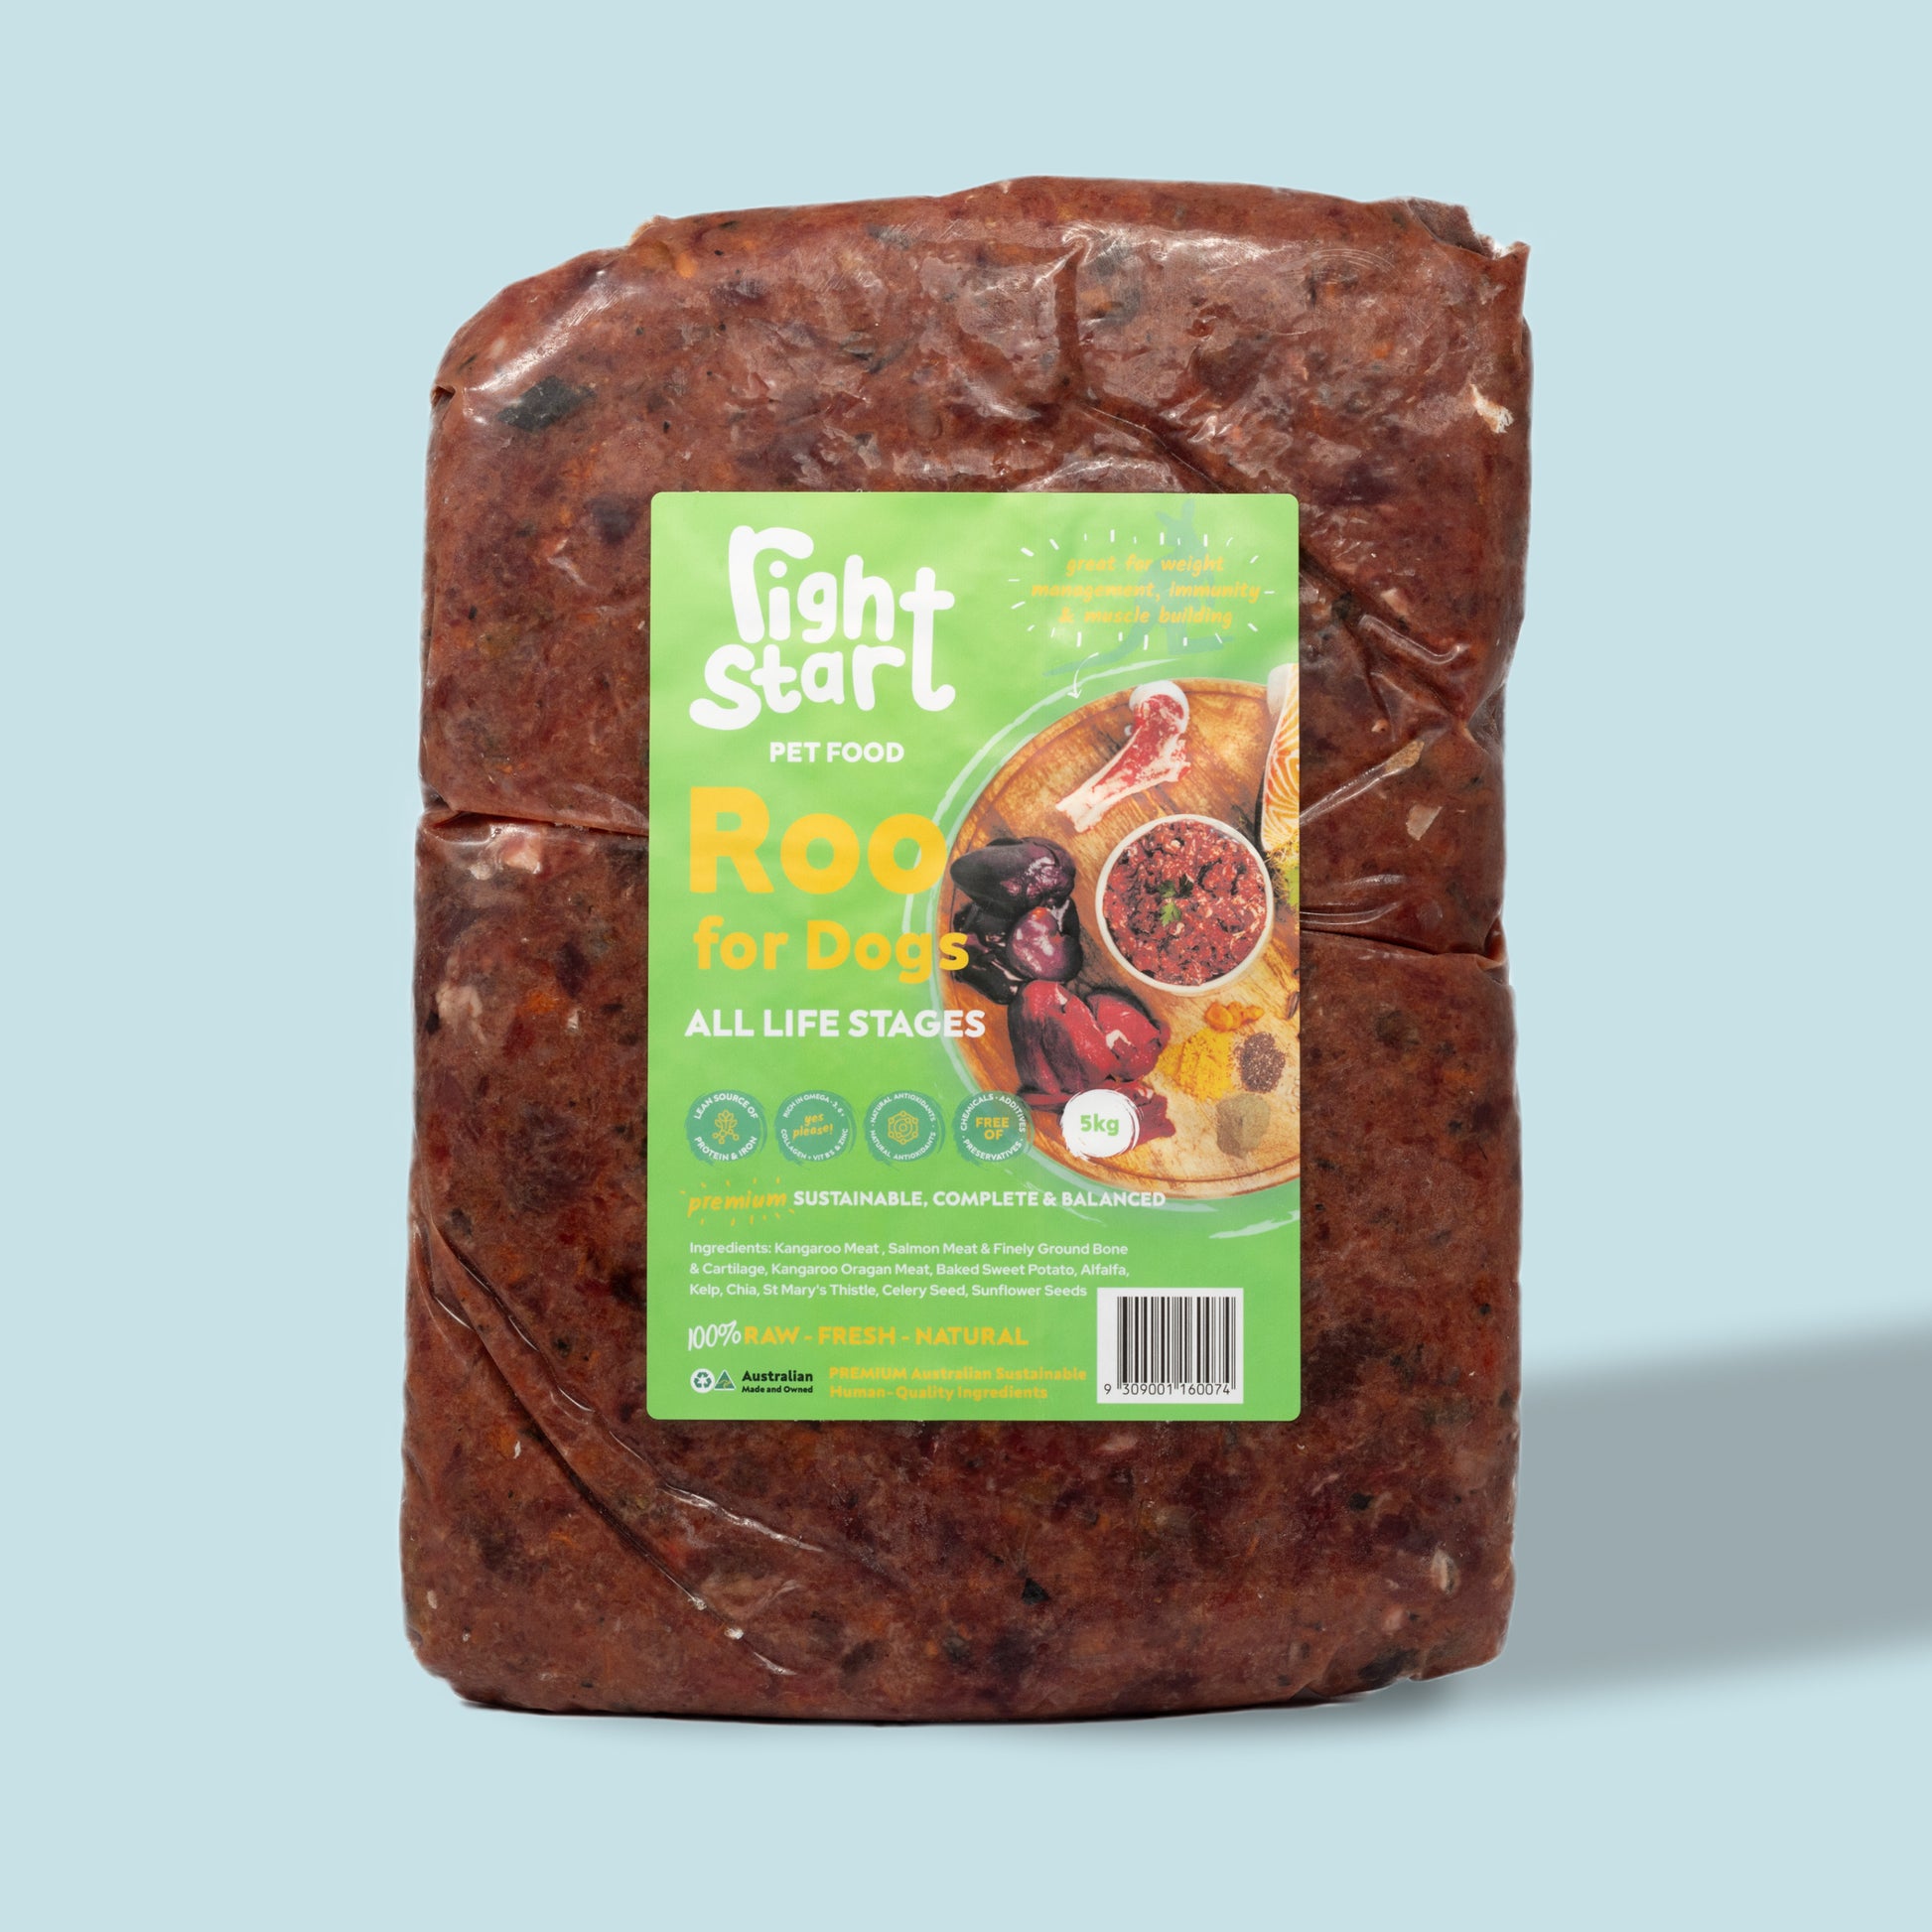 5kg frozen kangaroo mince for dogs with green sticker